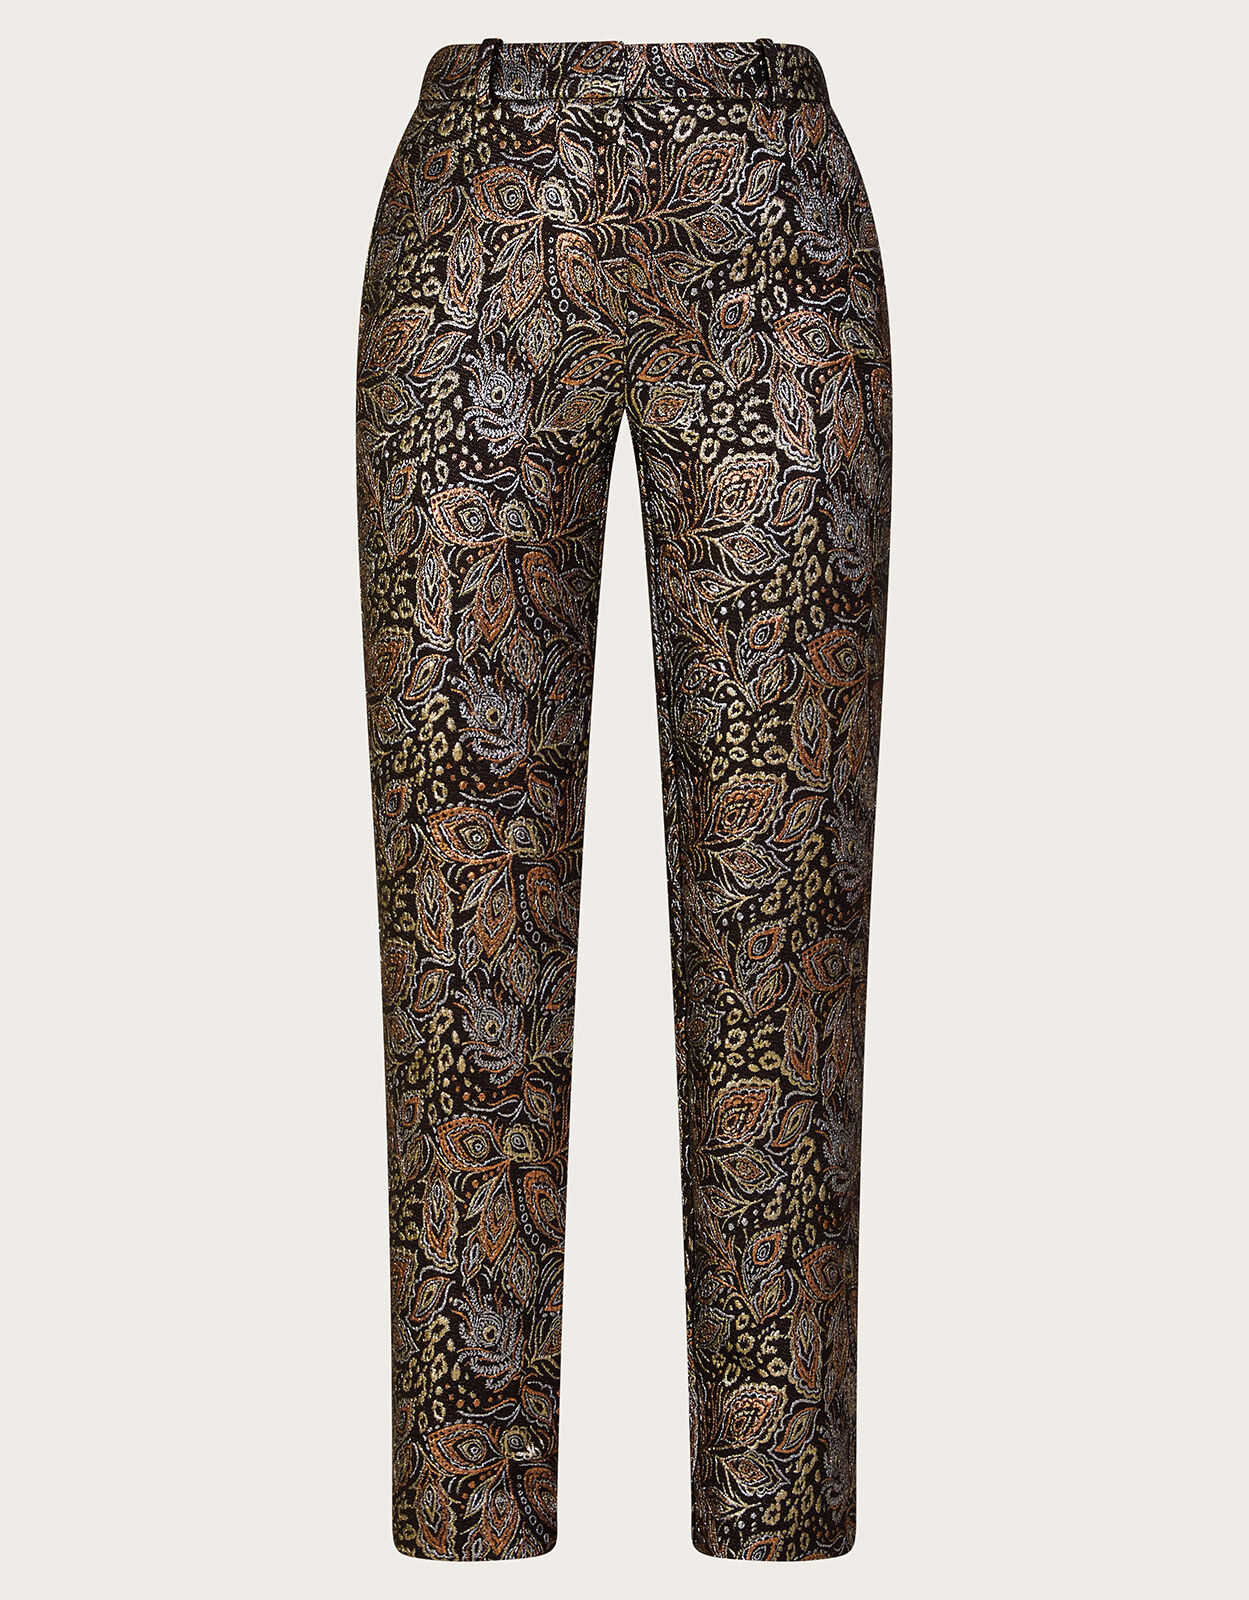 Jacquard trousers with pressed pleat, mint ivory | Intrend